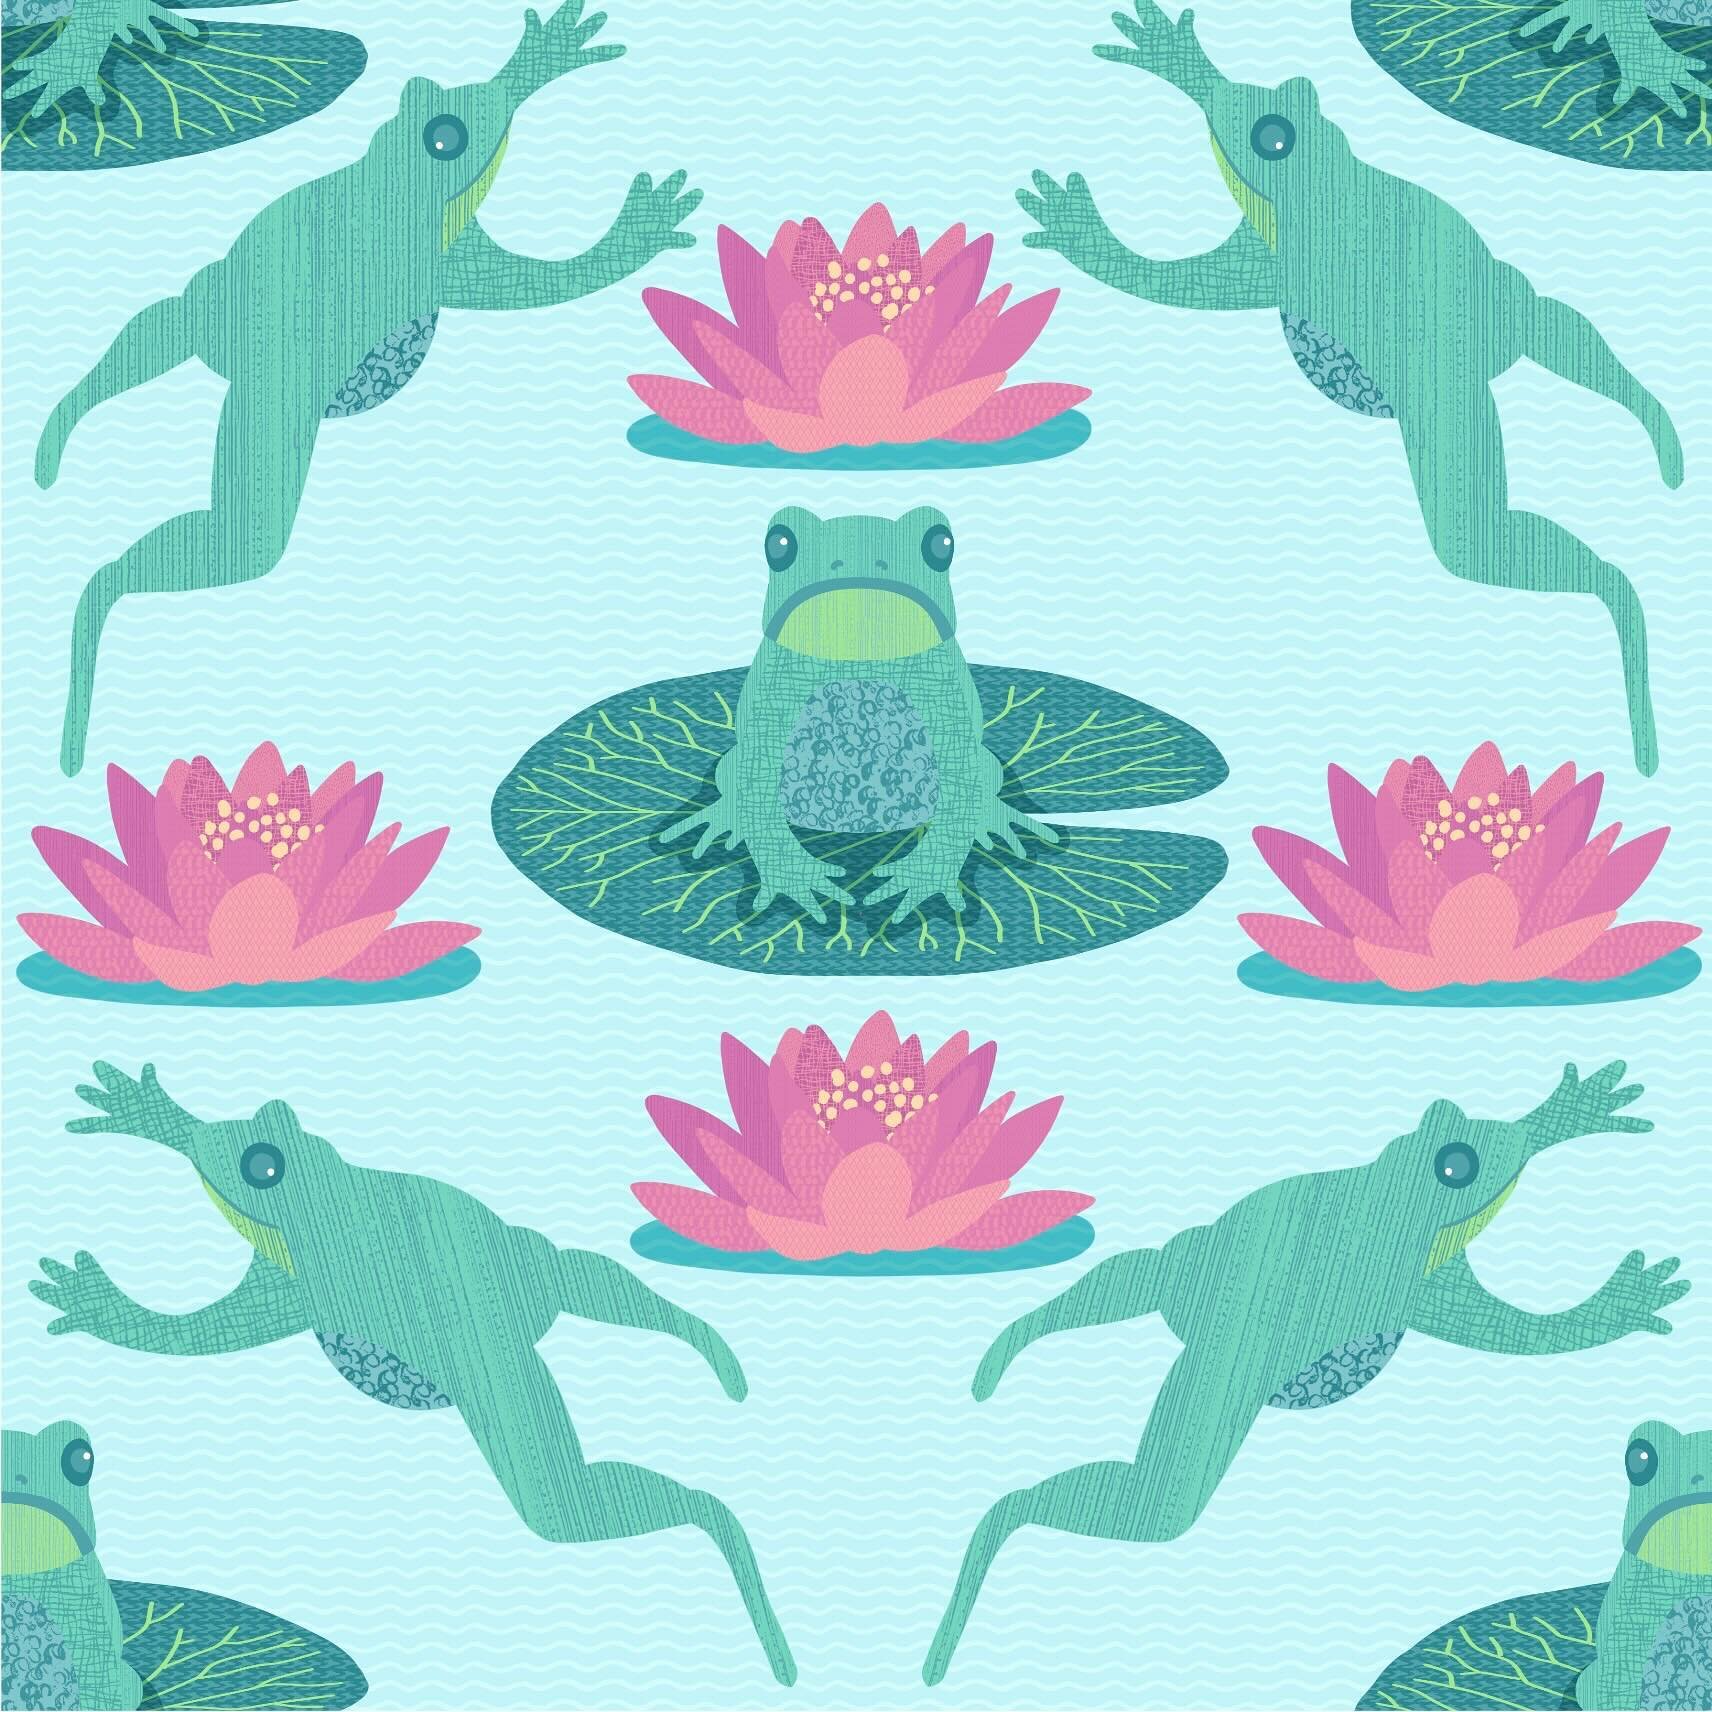 Leap Year Frogs &amp; Lily Pads
I had a lot of fun with this set of MidMod pattern brushes in Procreate. In celebration of February 29, 2024, I present you with lotuses, lily pads and frogs a leaping.

Visit the Spoonflower Design Challenge Voting pa